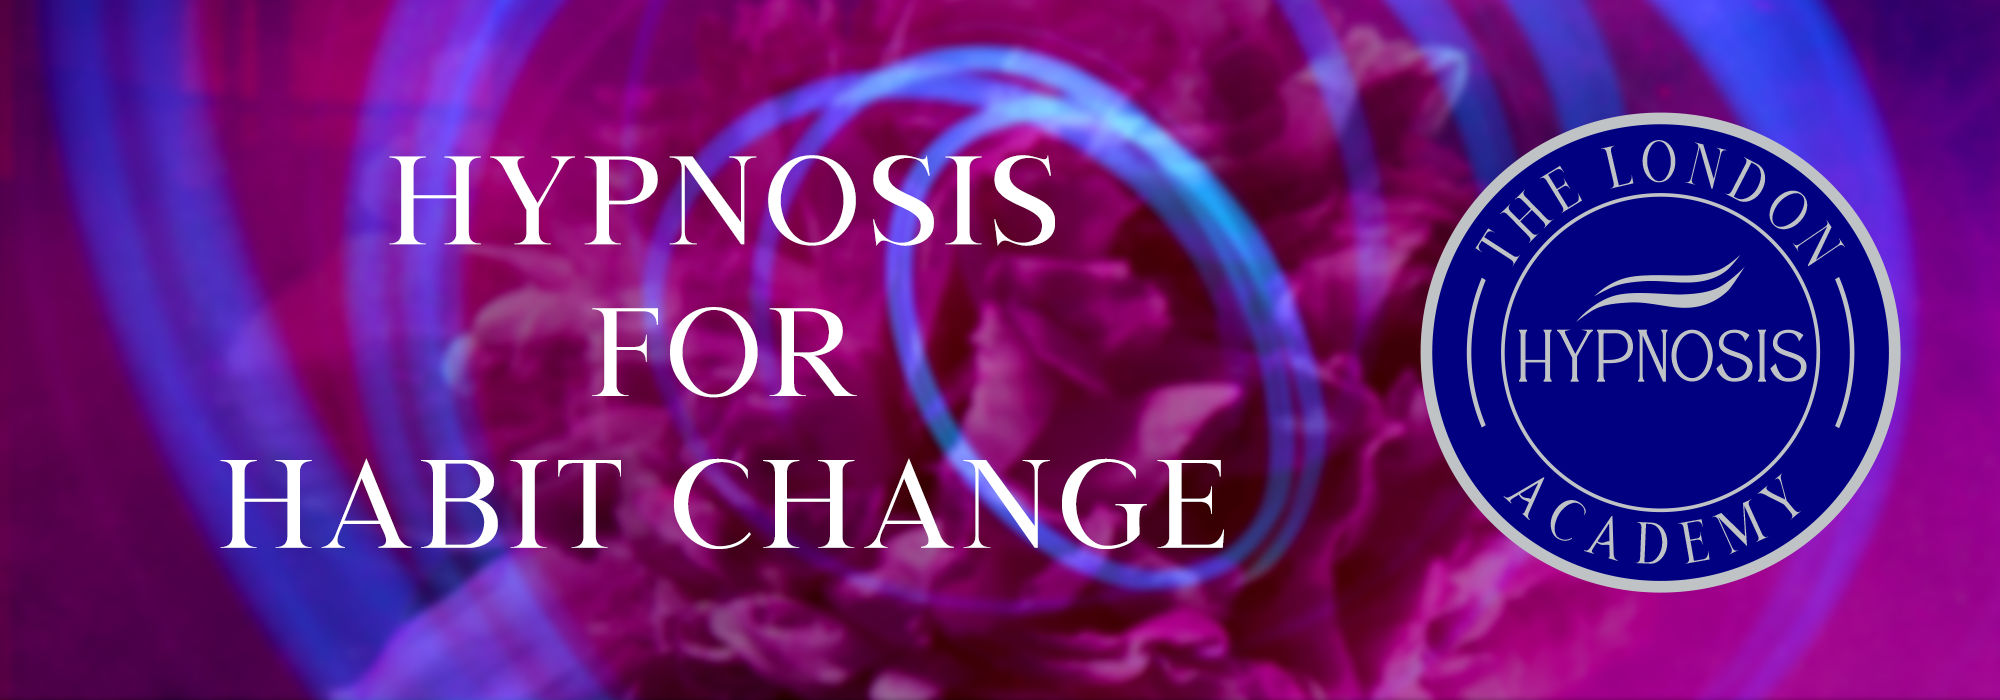 Hypnosis for Habit Change